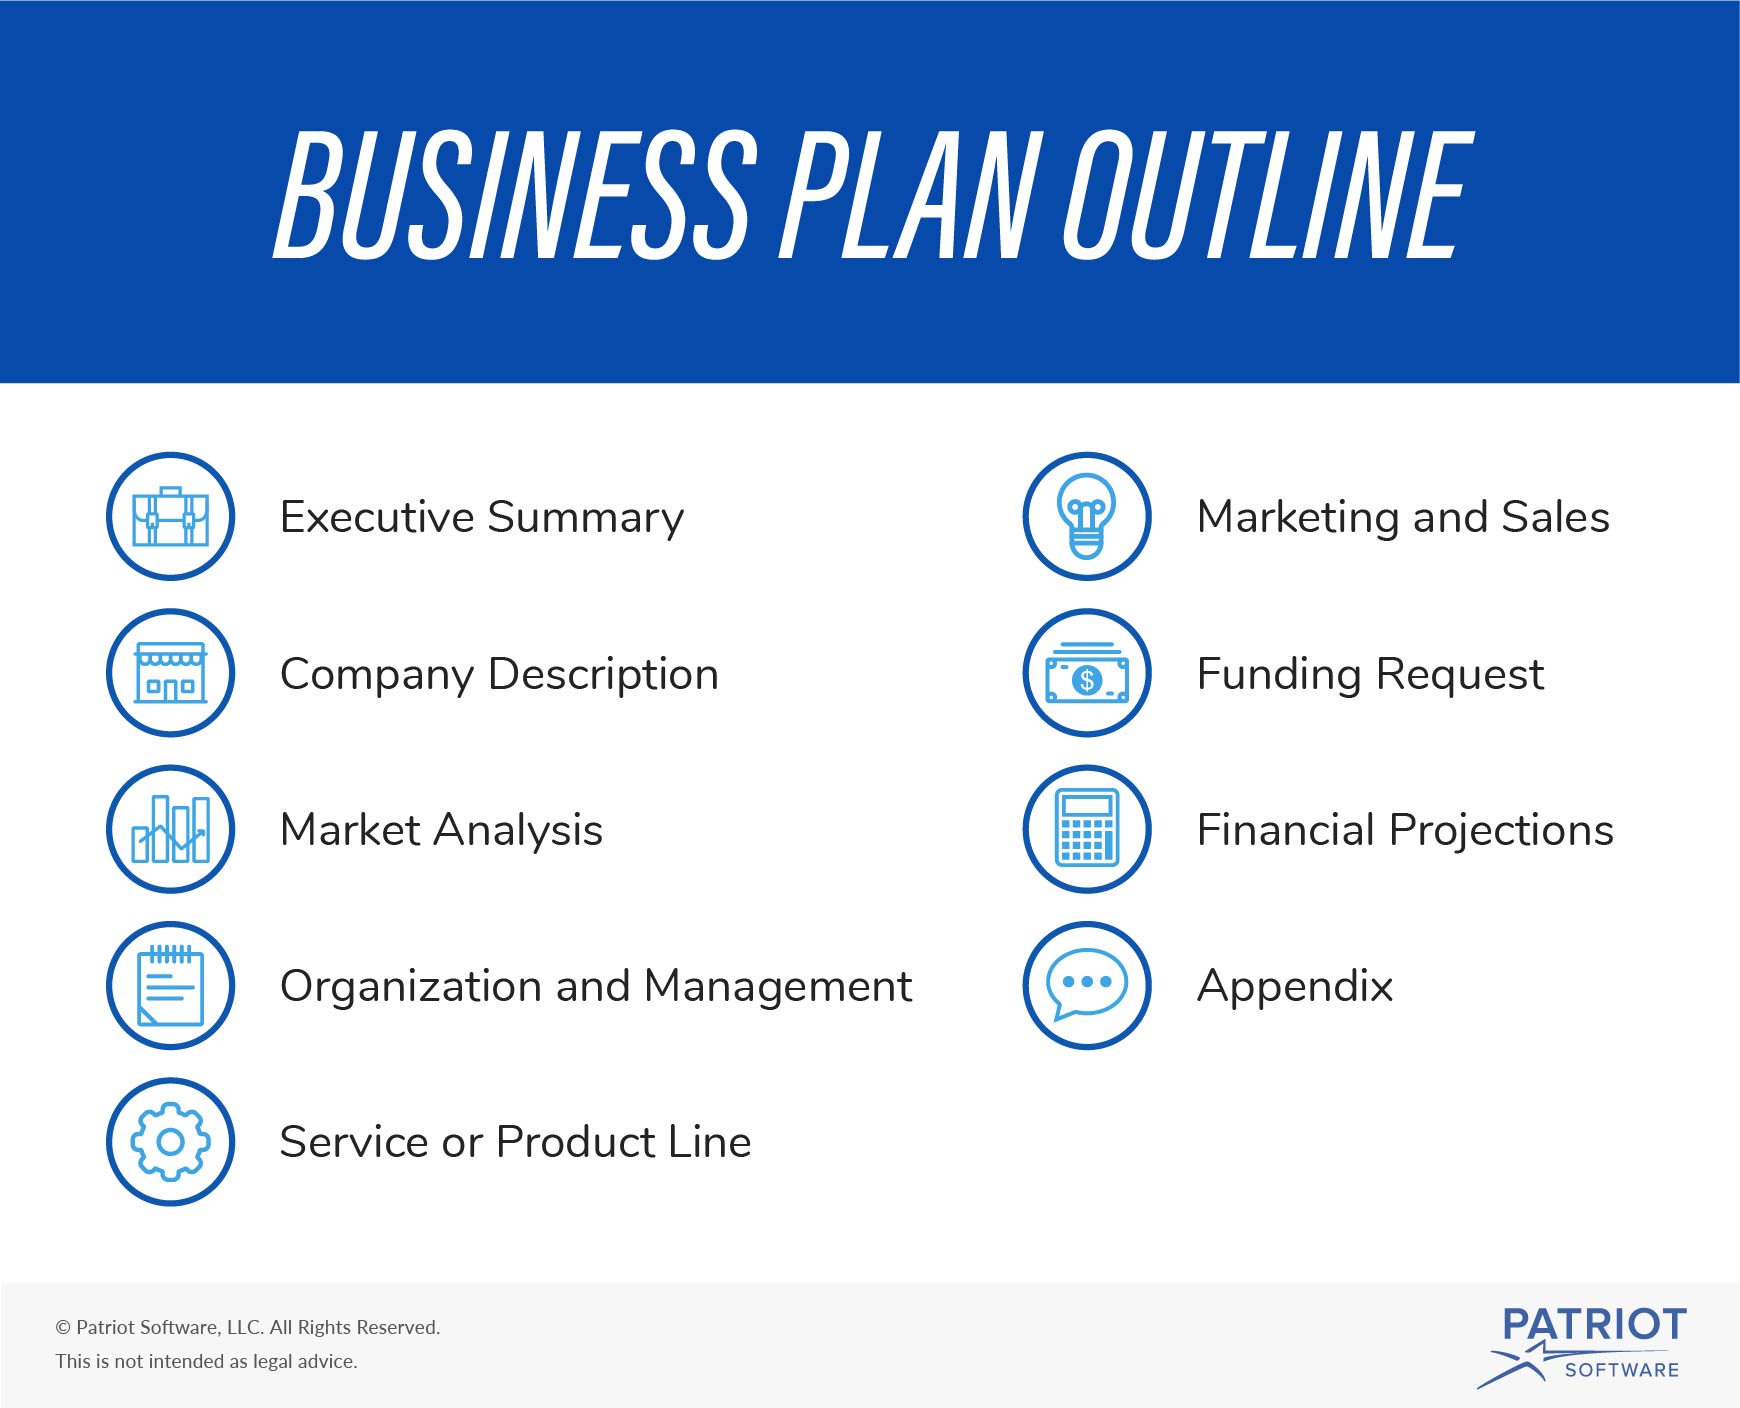 explain the steps to develop the business plan